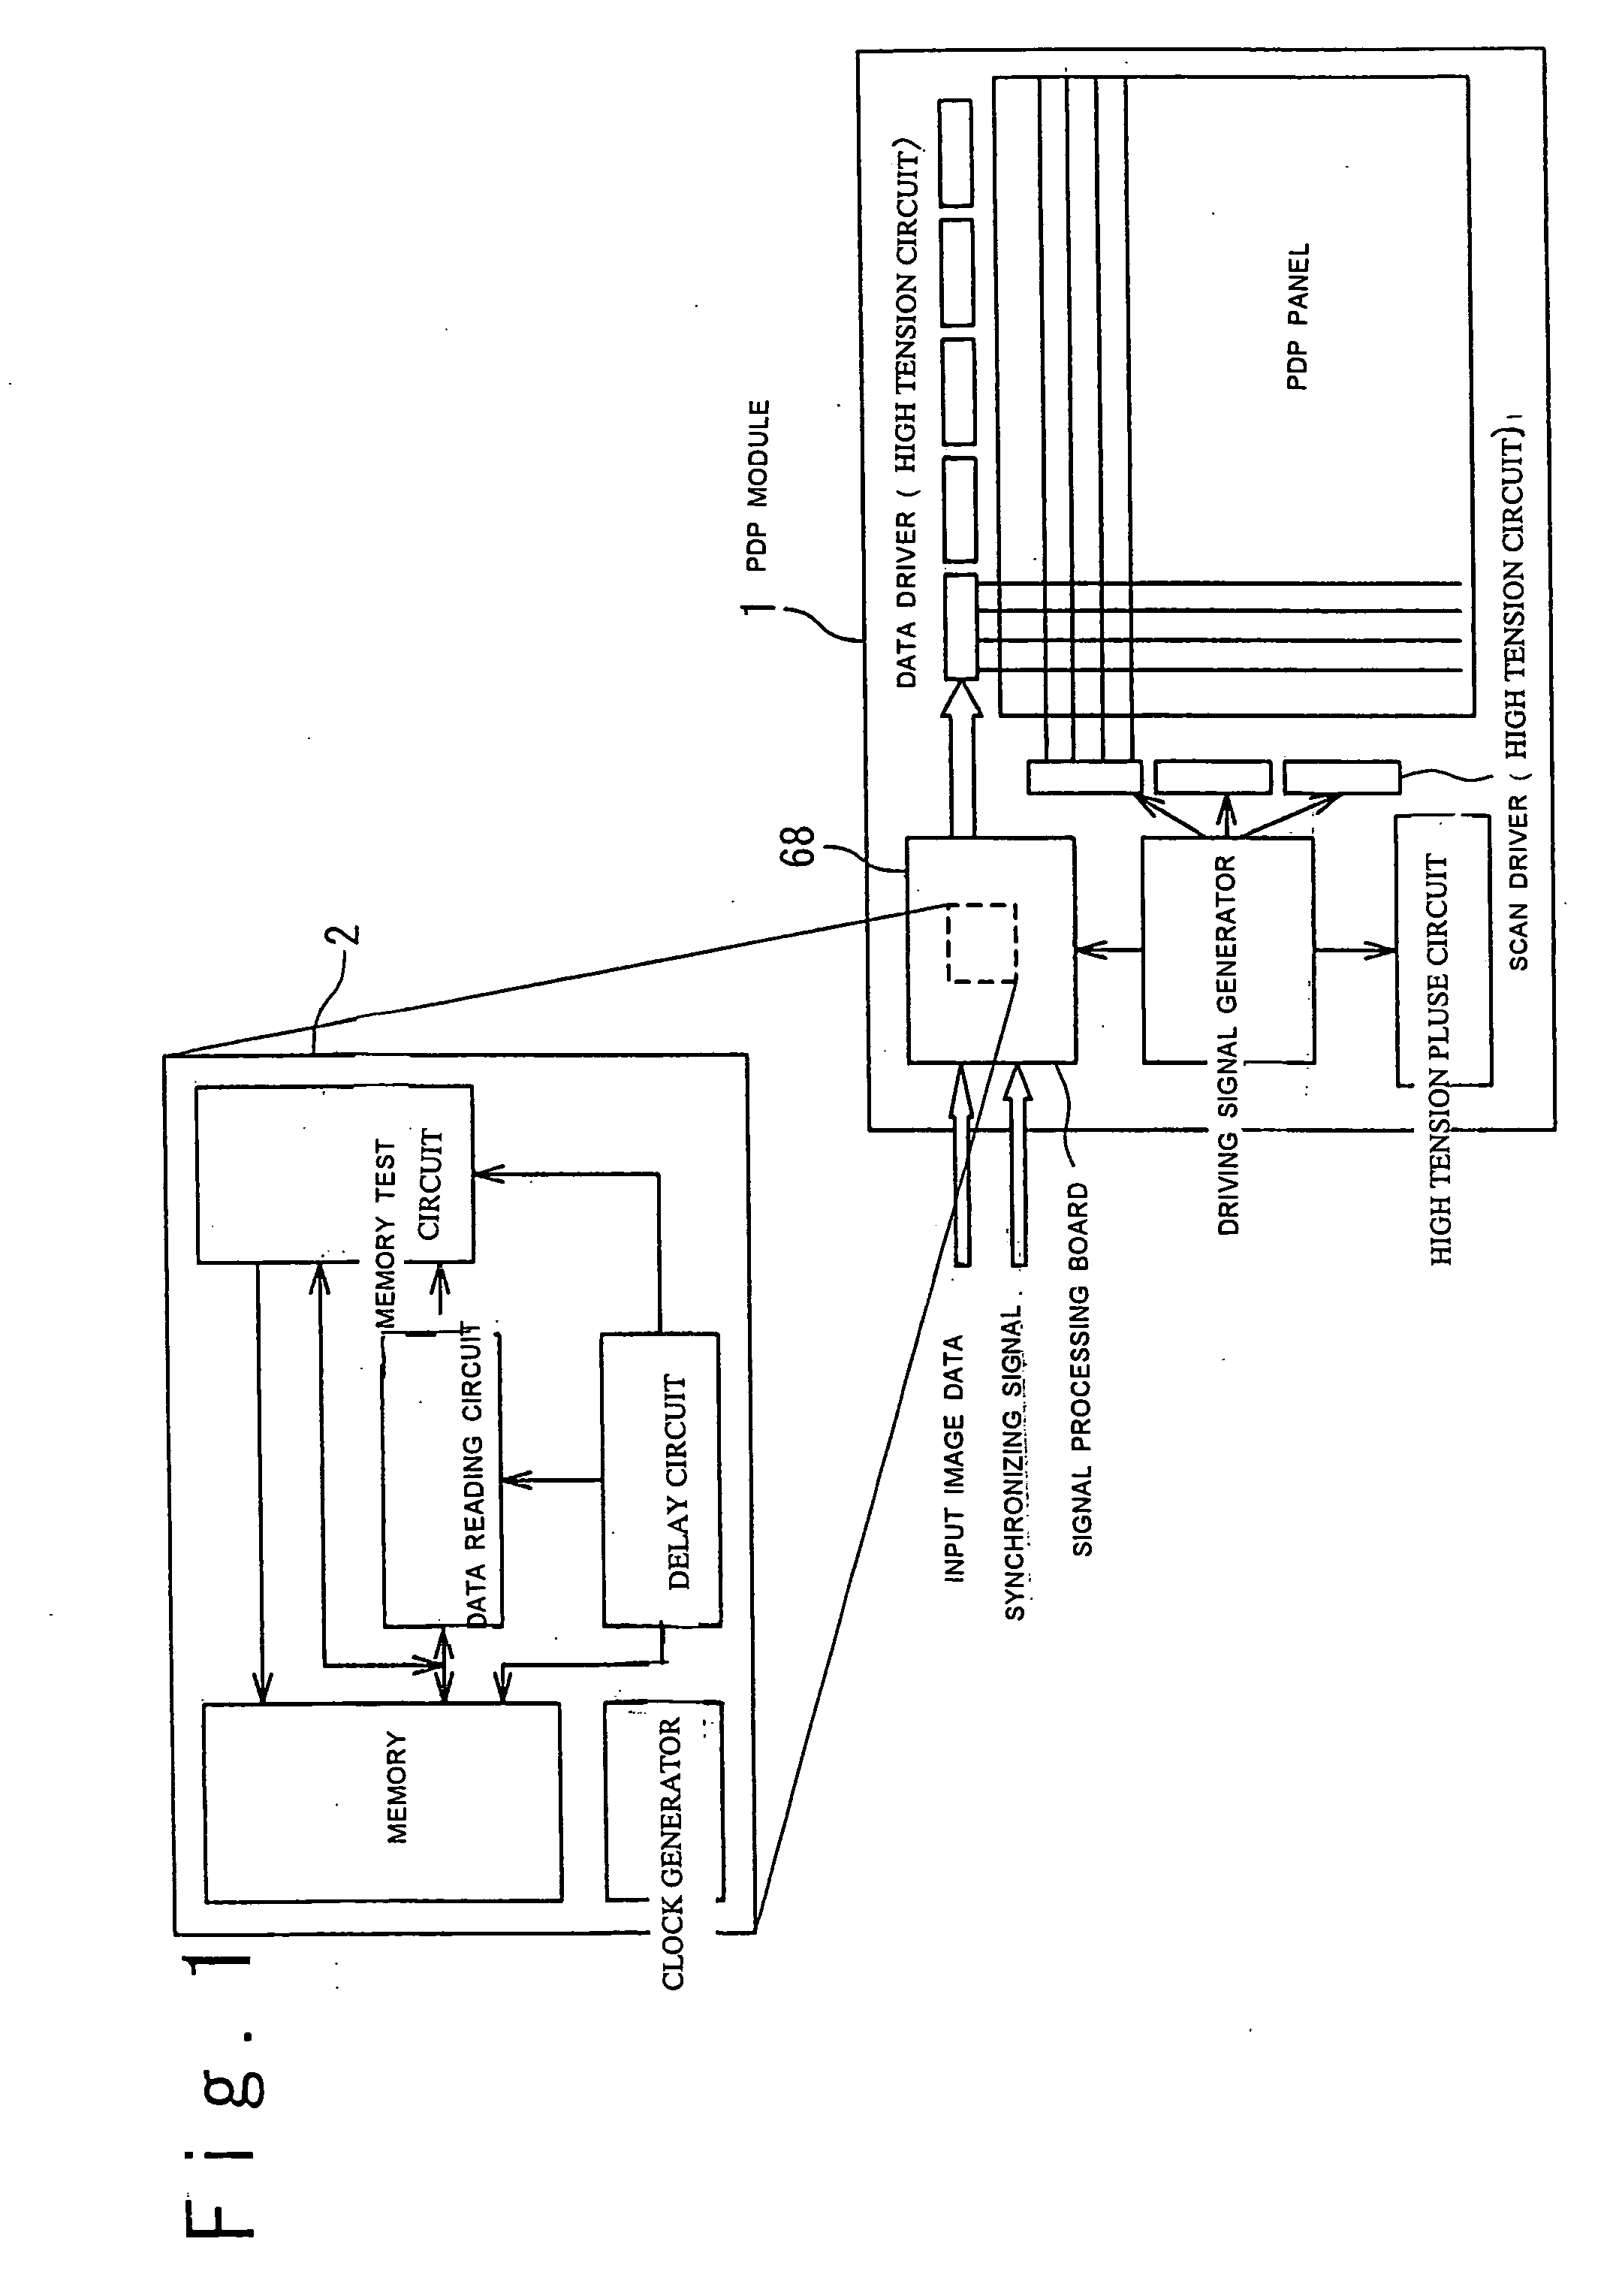 Memory access circuit for adjusting delay of internal clock signal used for memory control